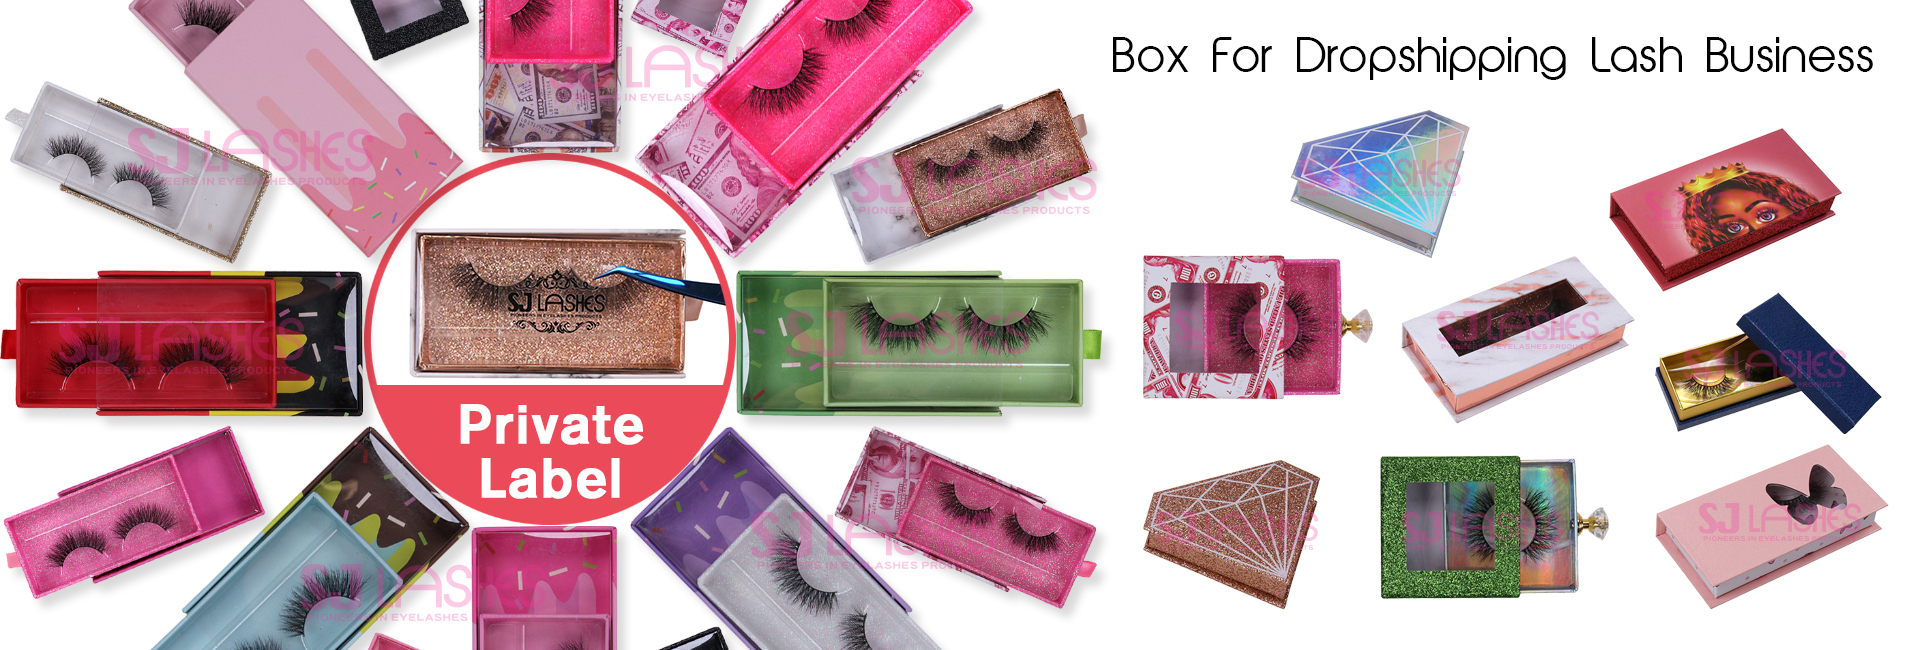 Box for Dropshipping Lash Business